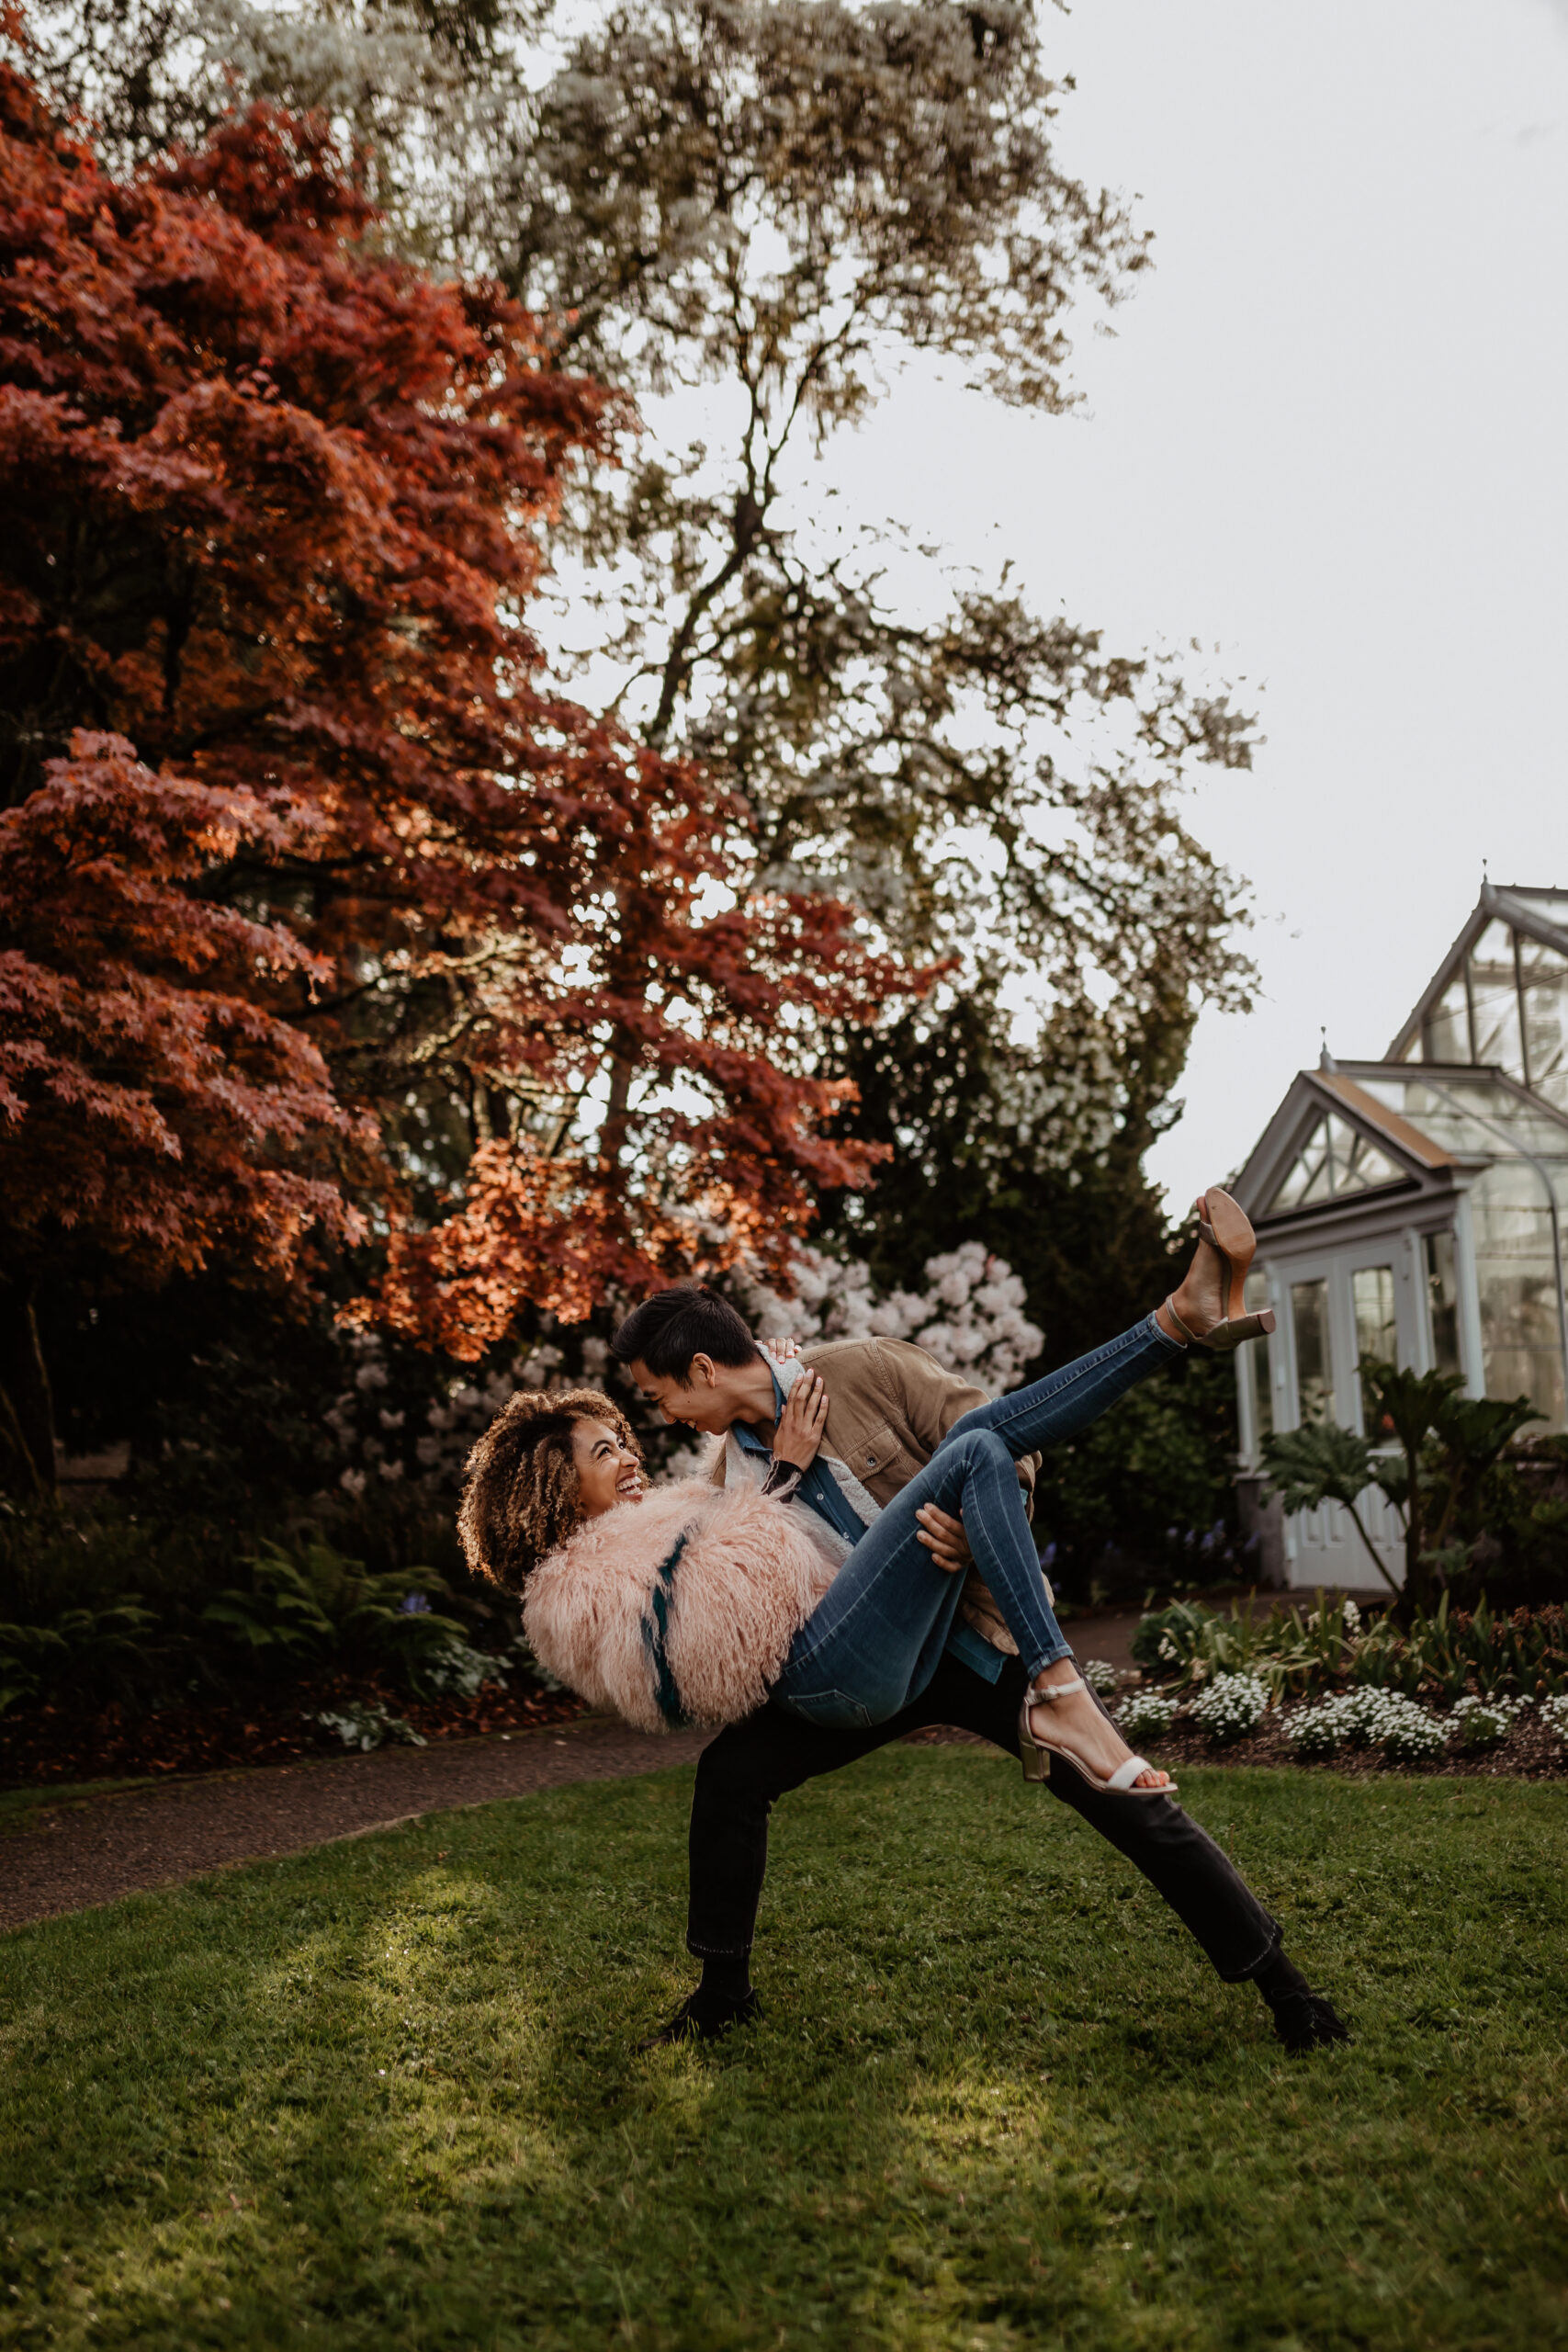 Woman being princess carried and dipped by man in front of colorful trees at Volunteer Park.